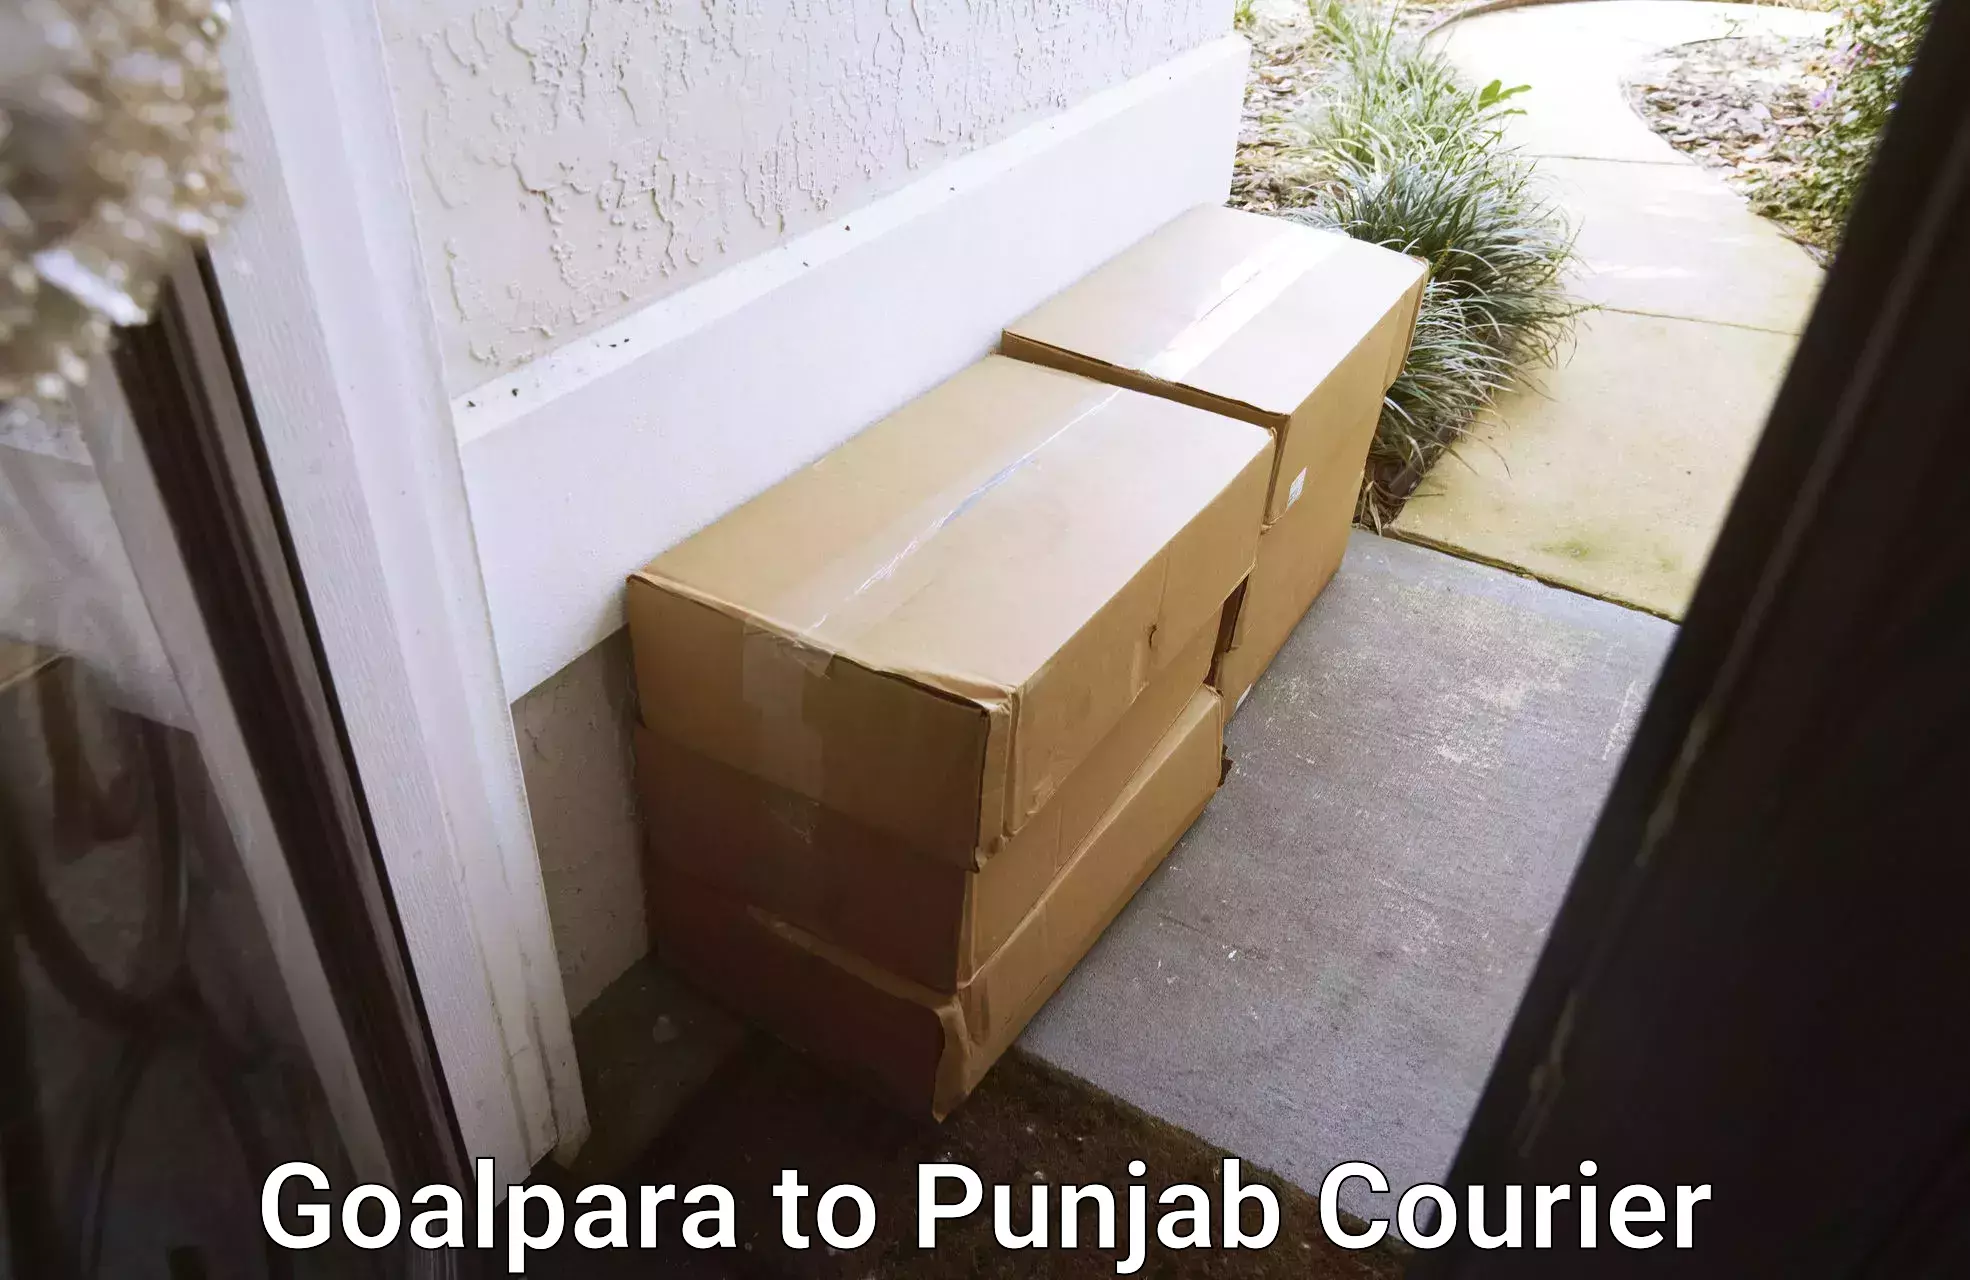 Residential courier service Goalpara to Jalalabad